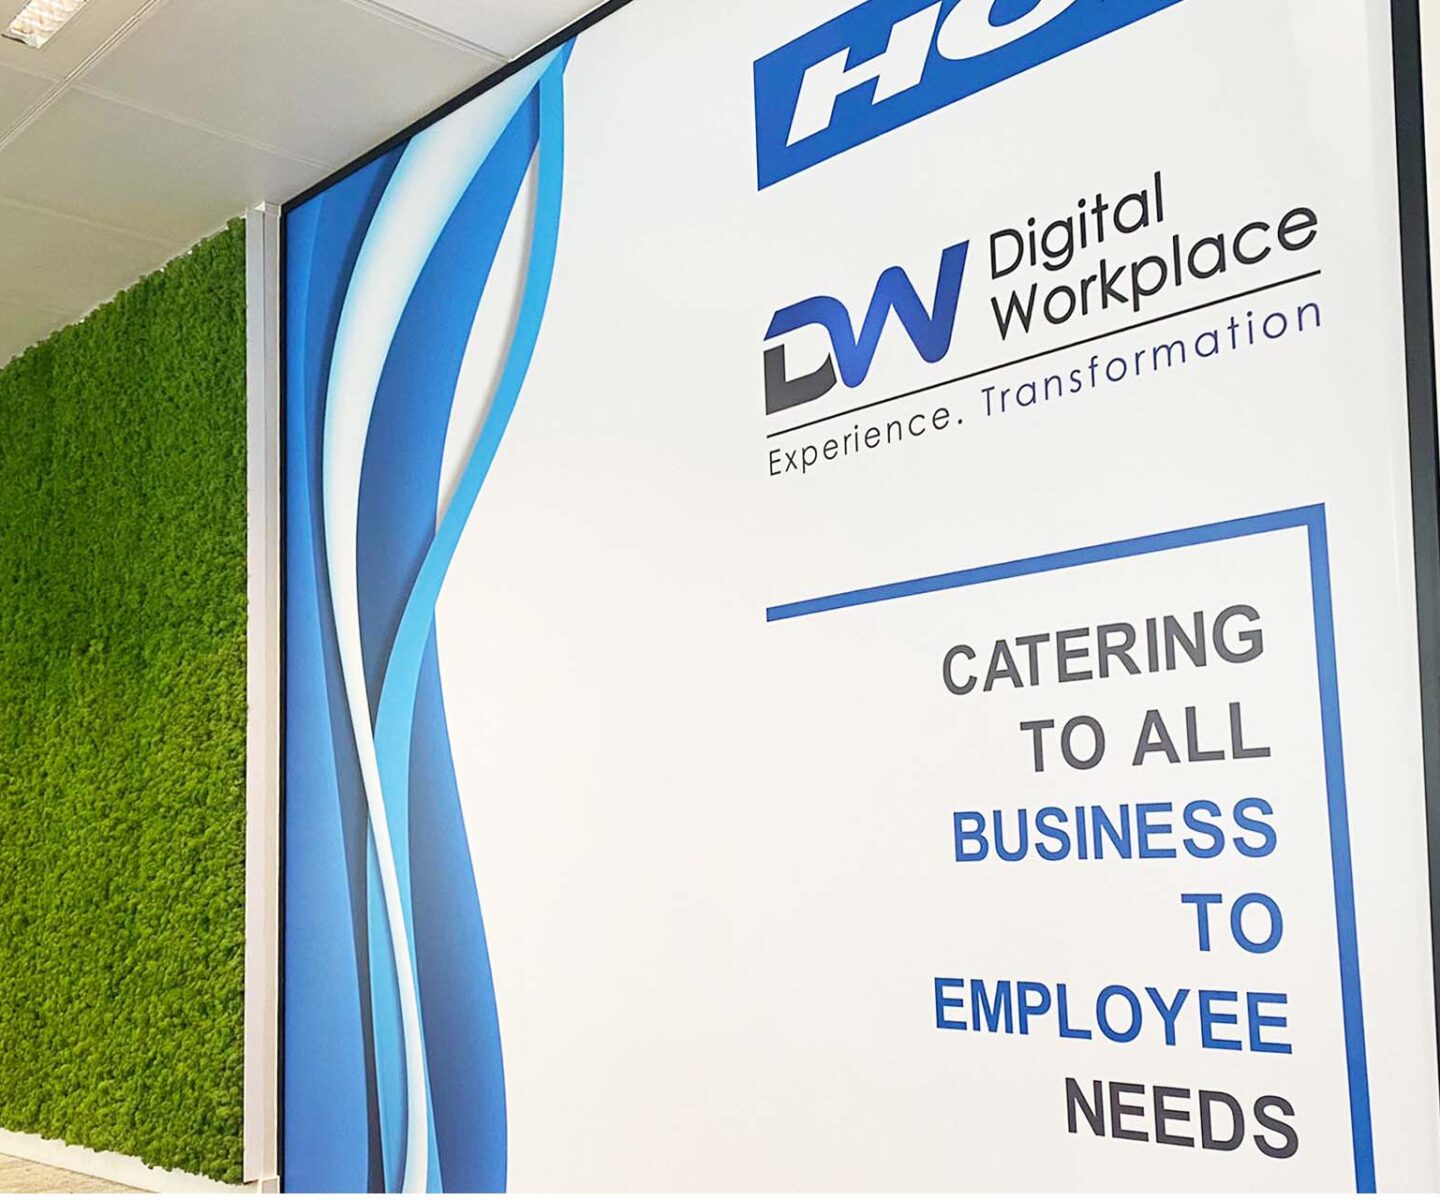 HCL Feature Wall